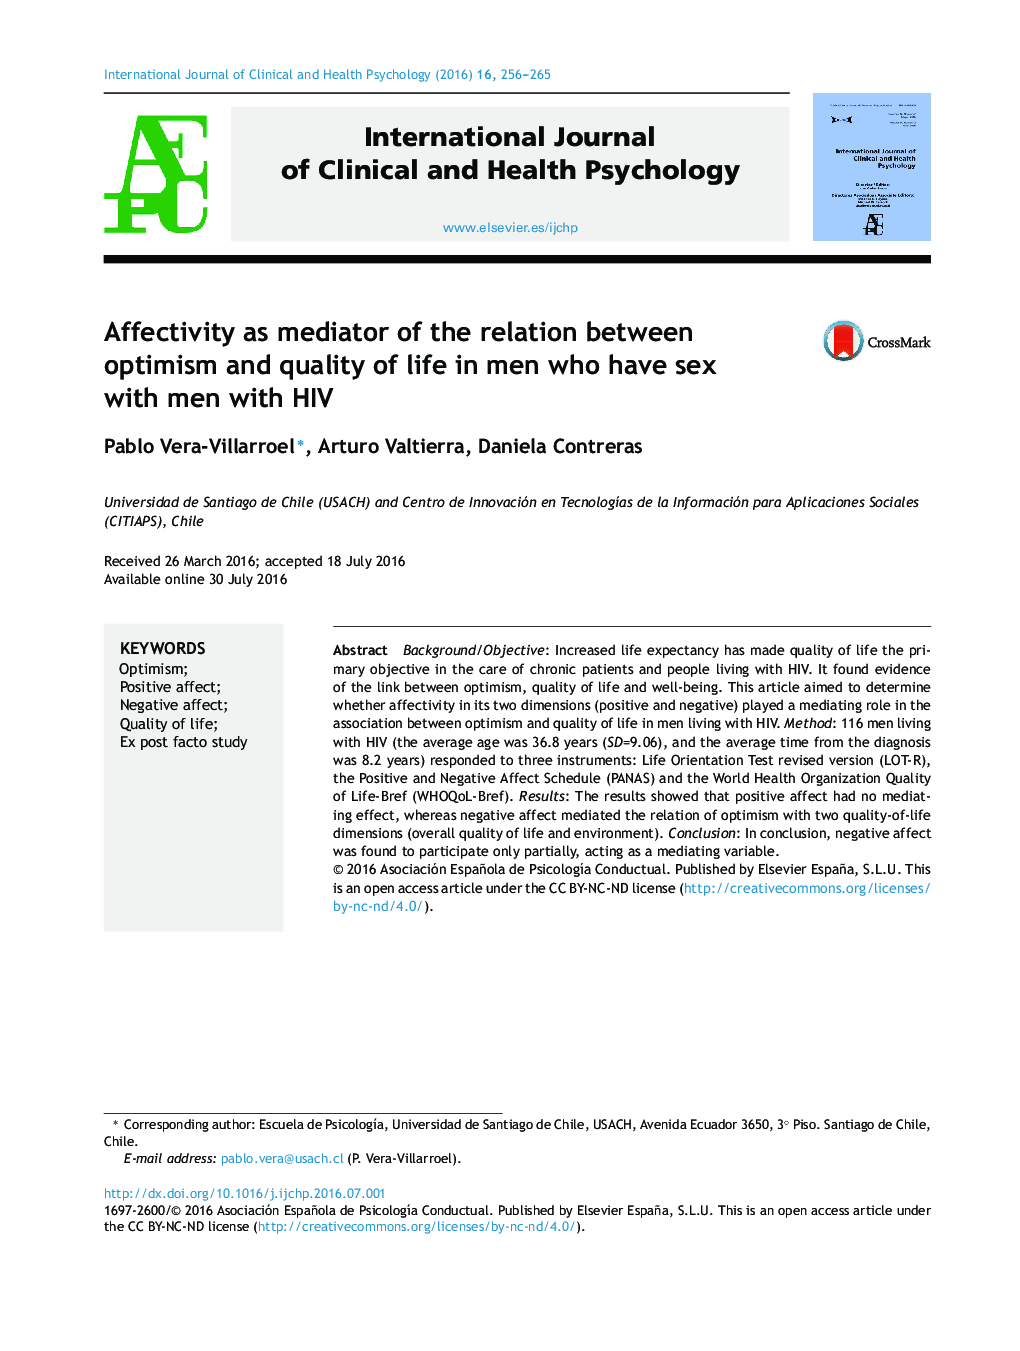 Affectivity as mediator of the relation between optimism and quality of life in men who have sex with men with HIV